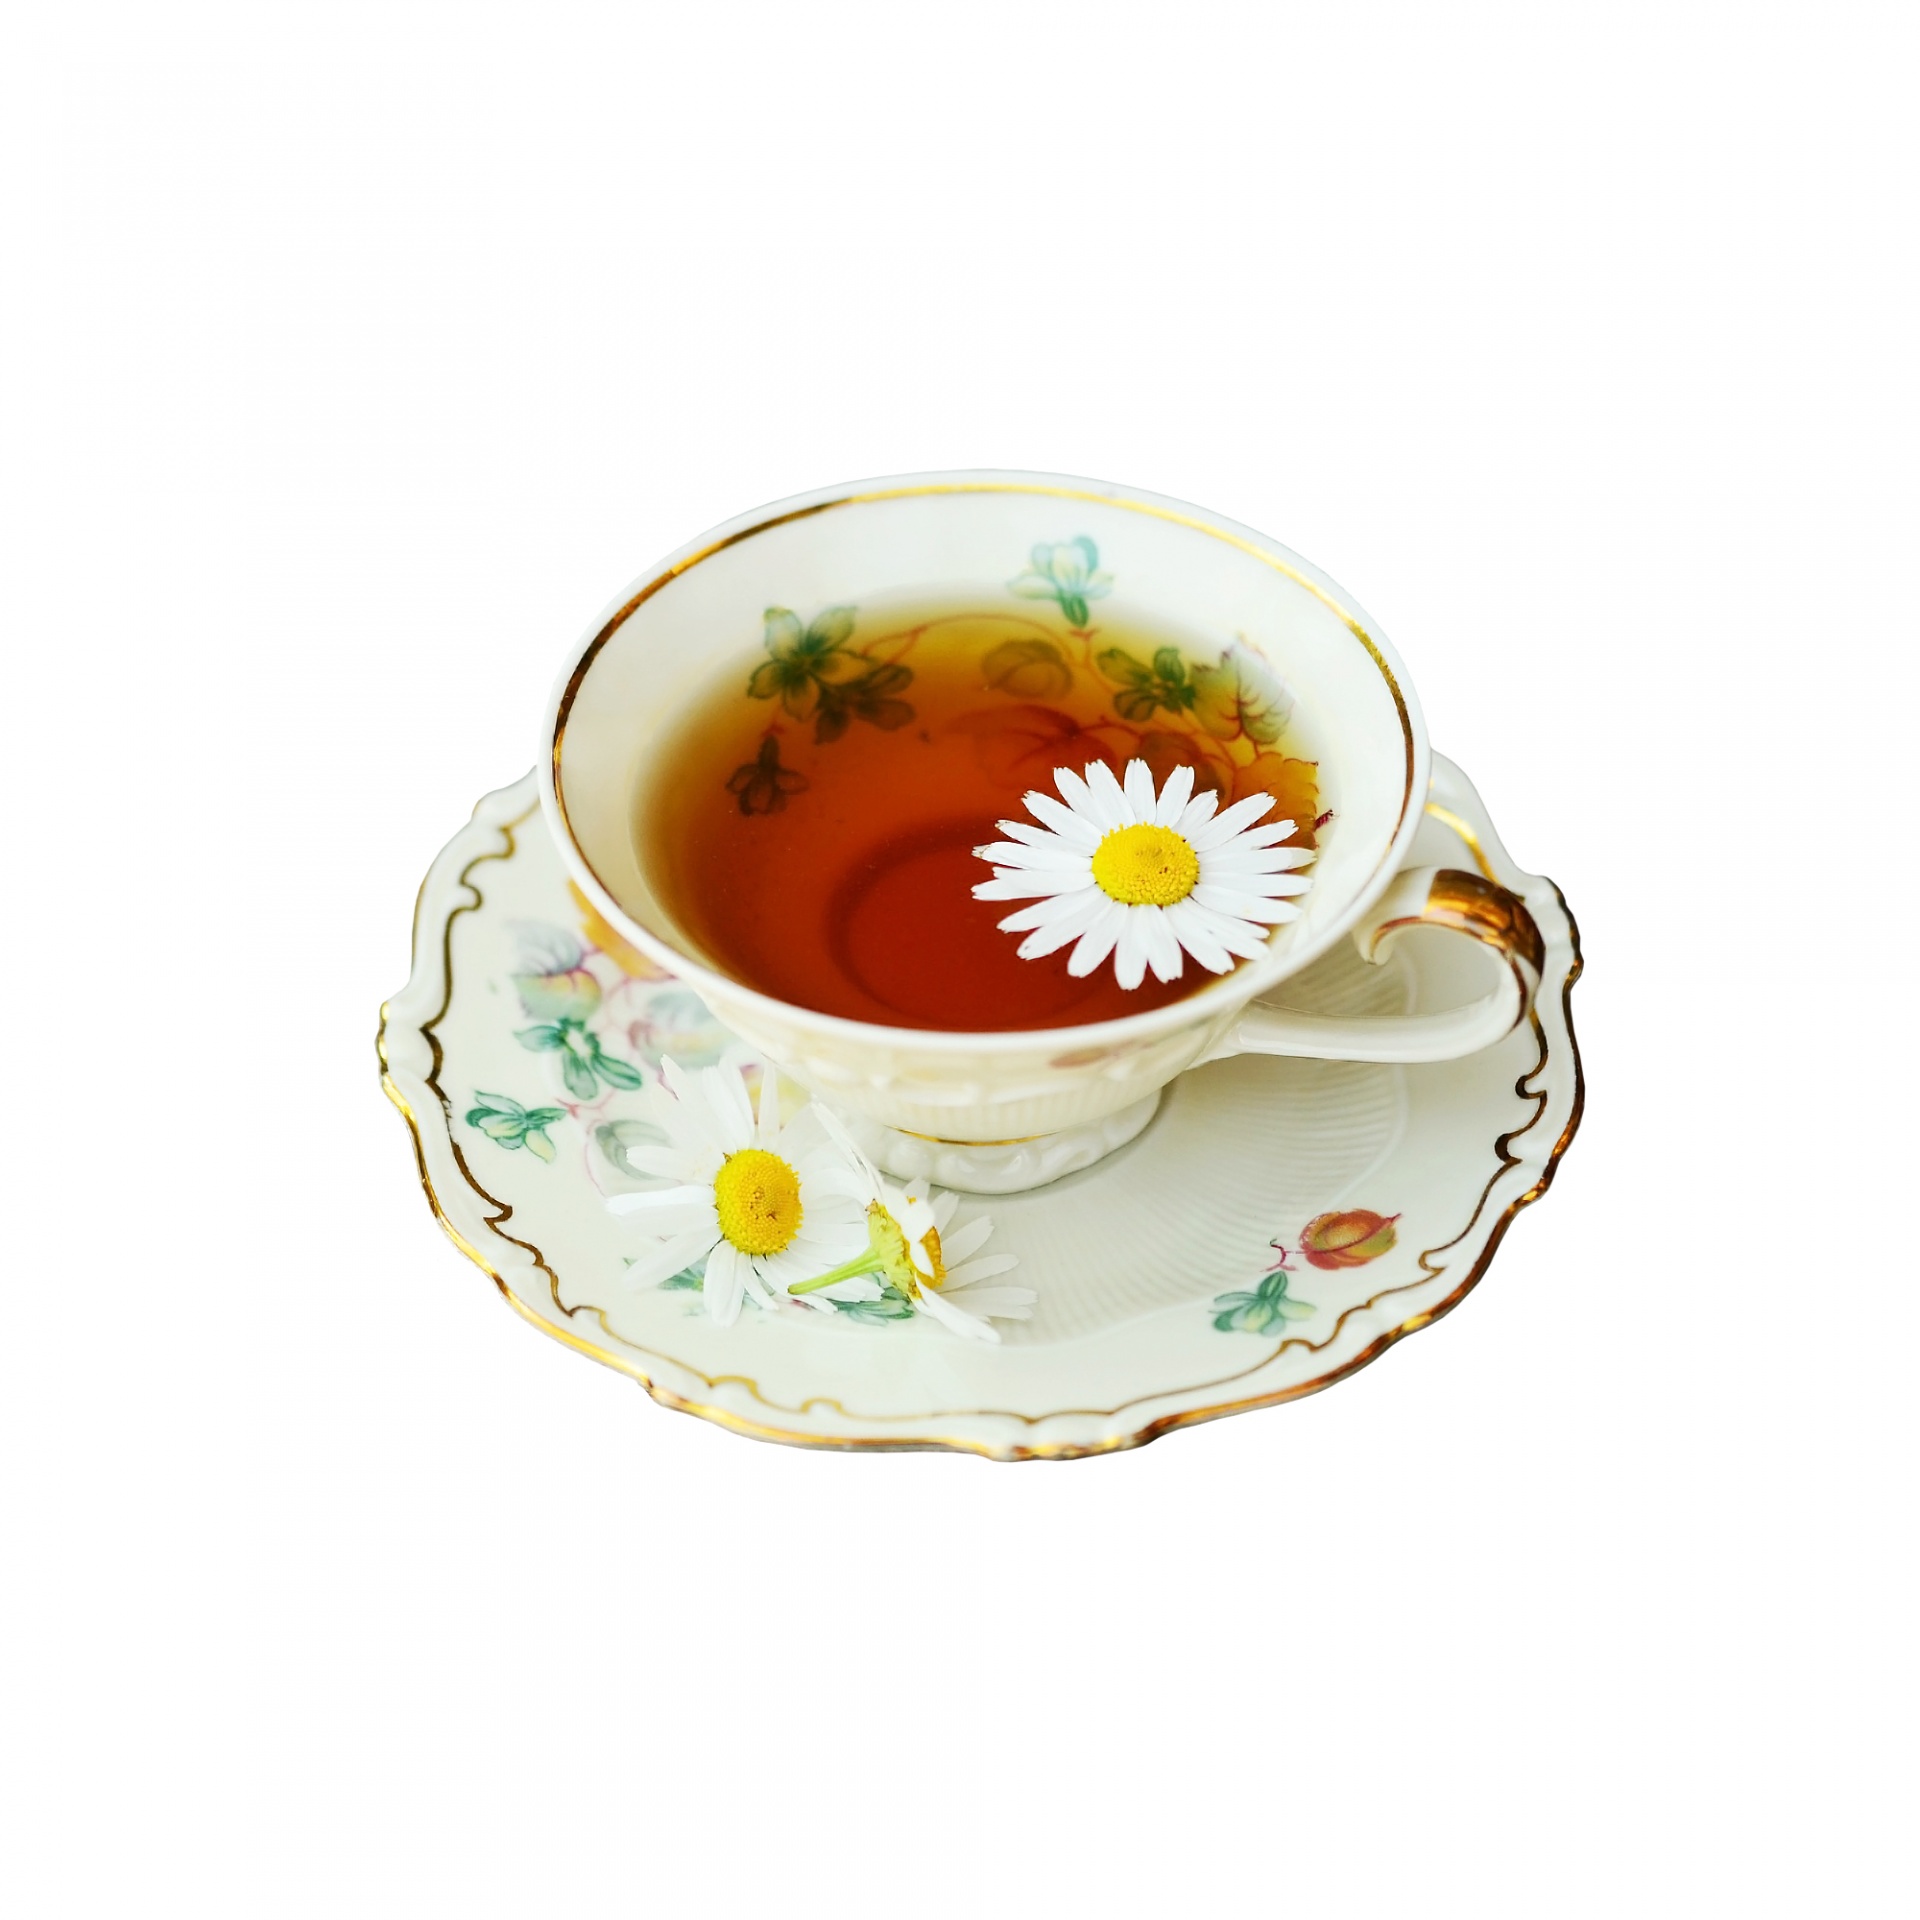 Cup Of Tea Isolated